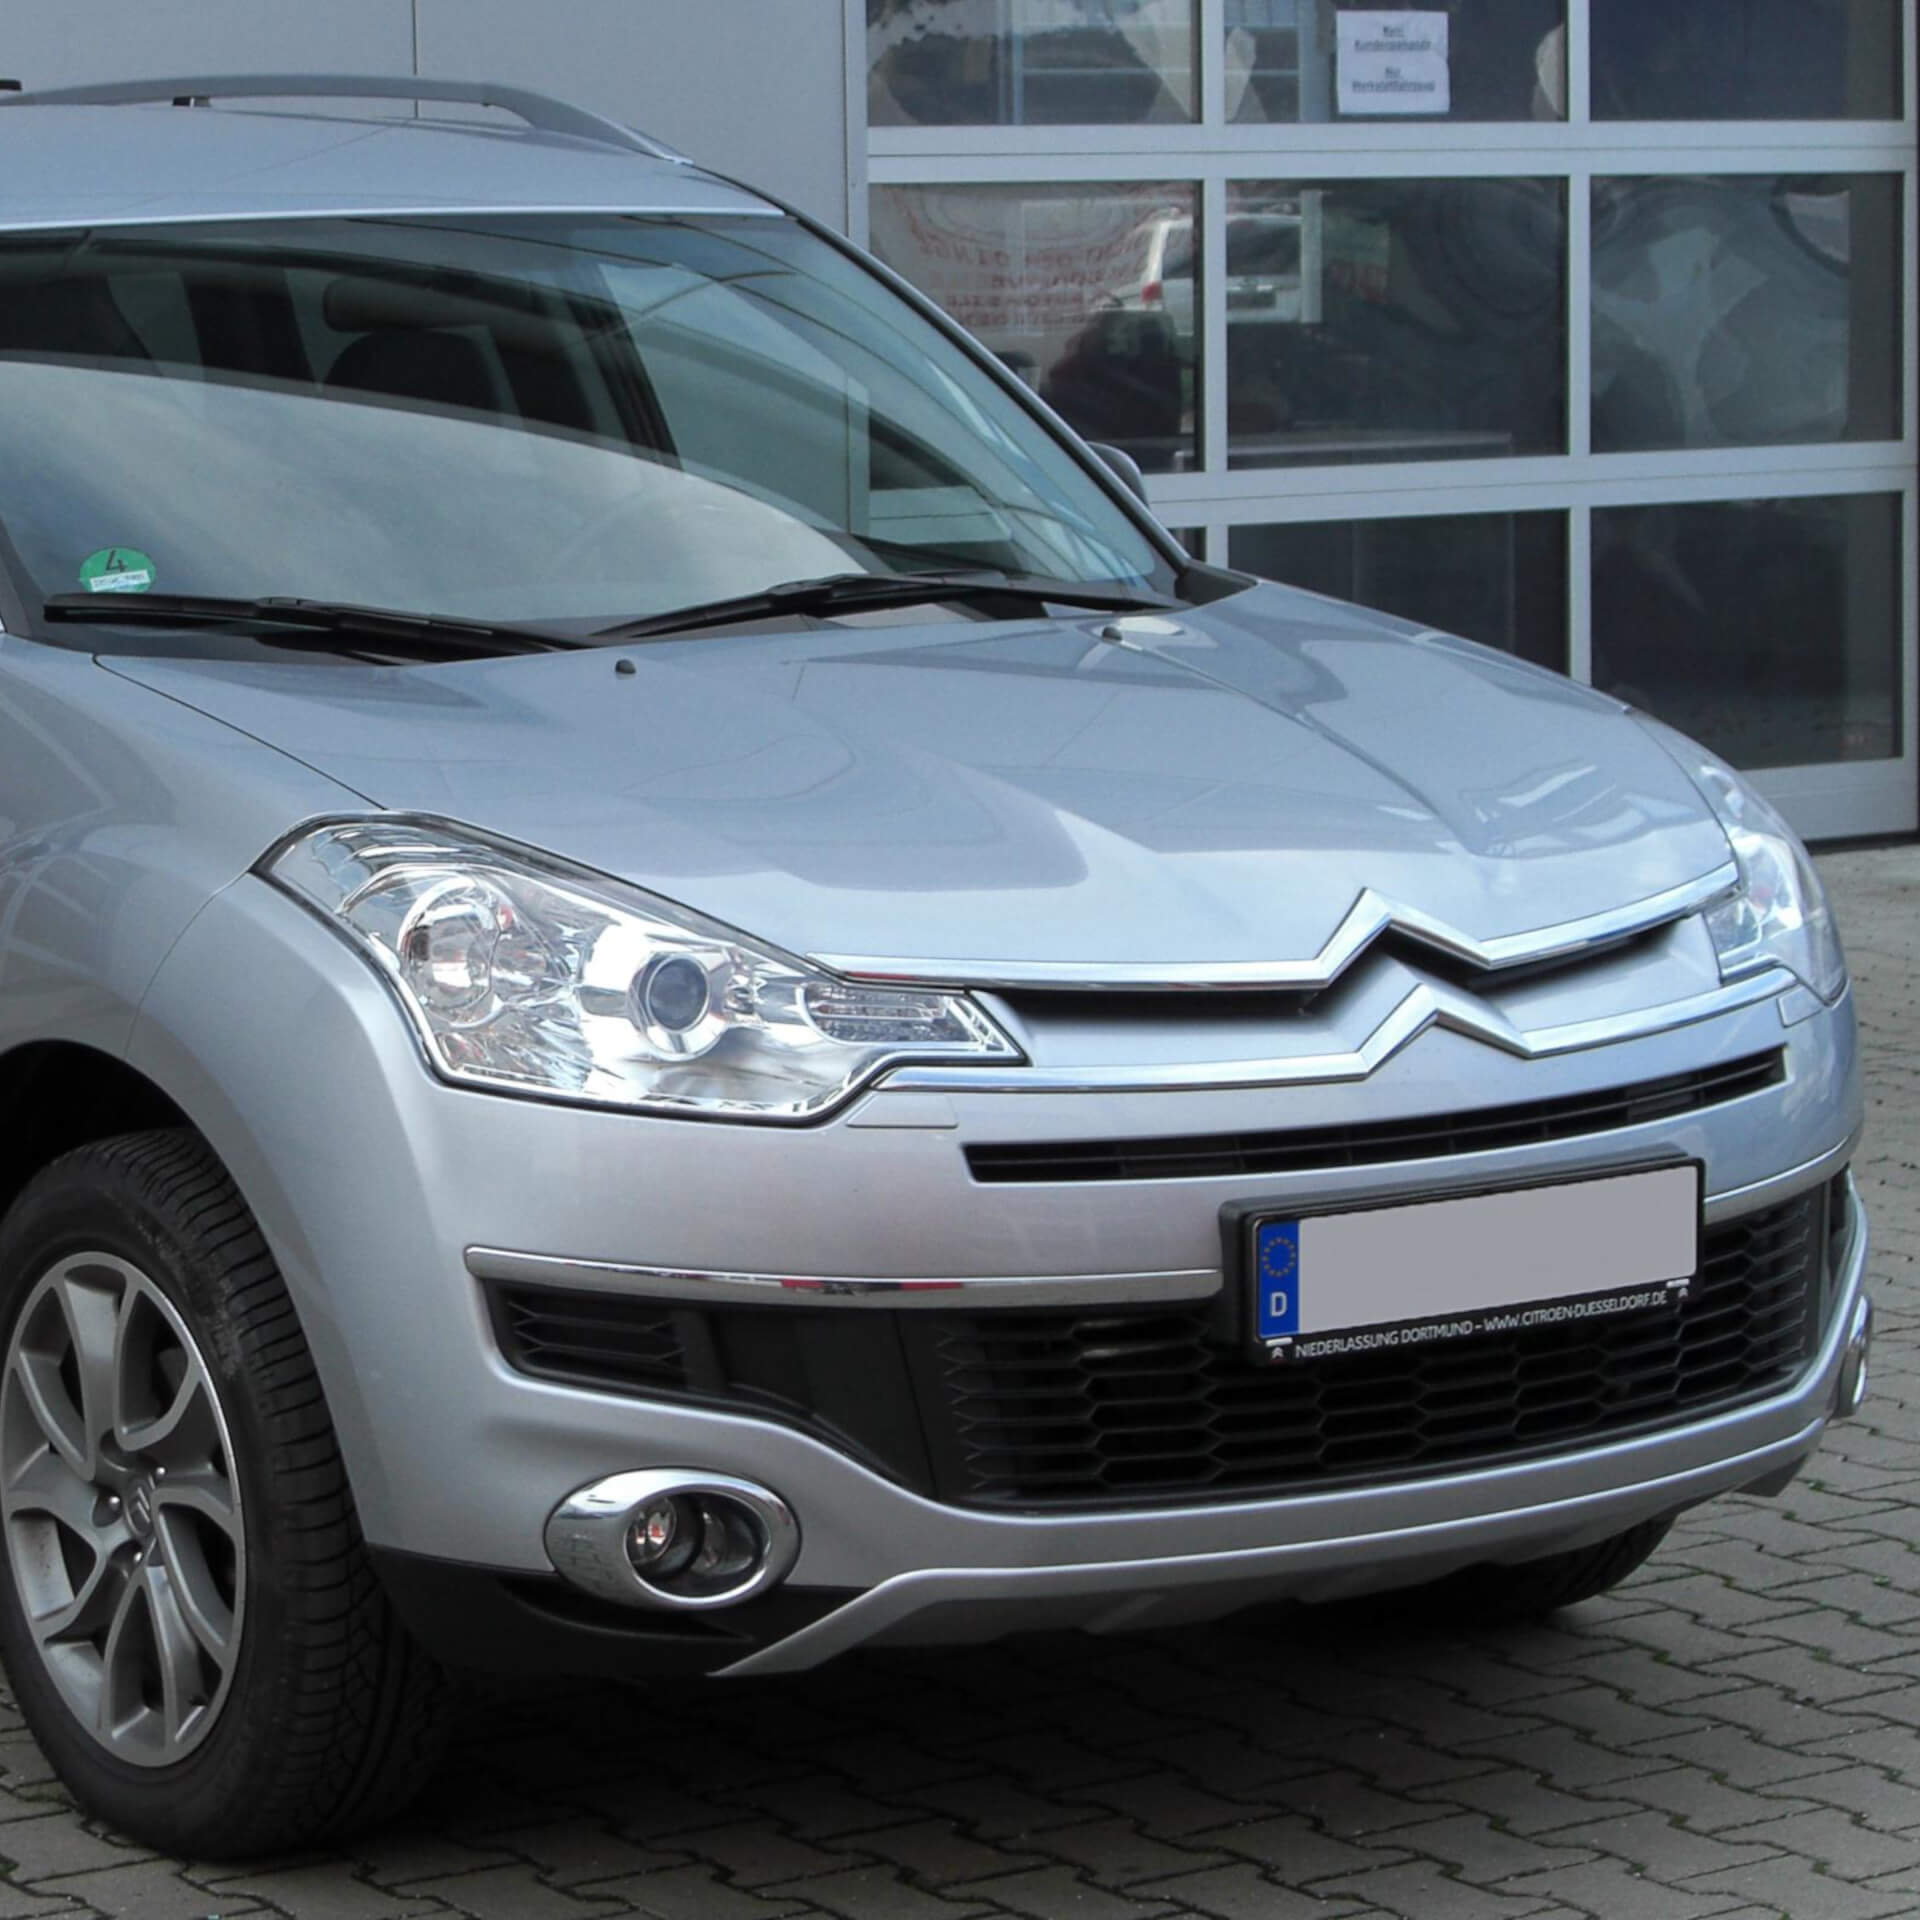 Direct4x4 accessories for Citroen C-Crosser vehicles with a photo of the front of a silver Citroen C-Crosser